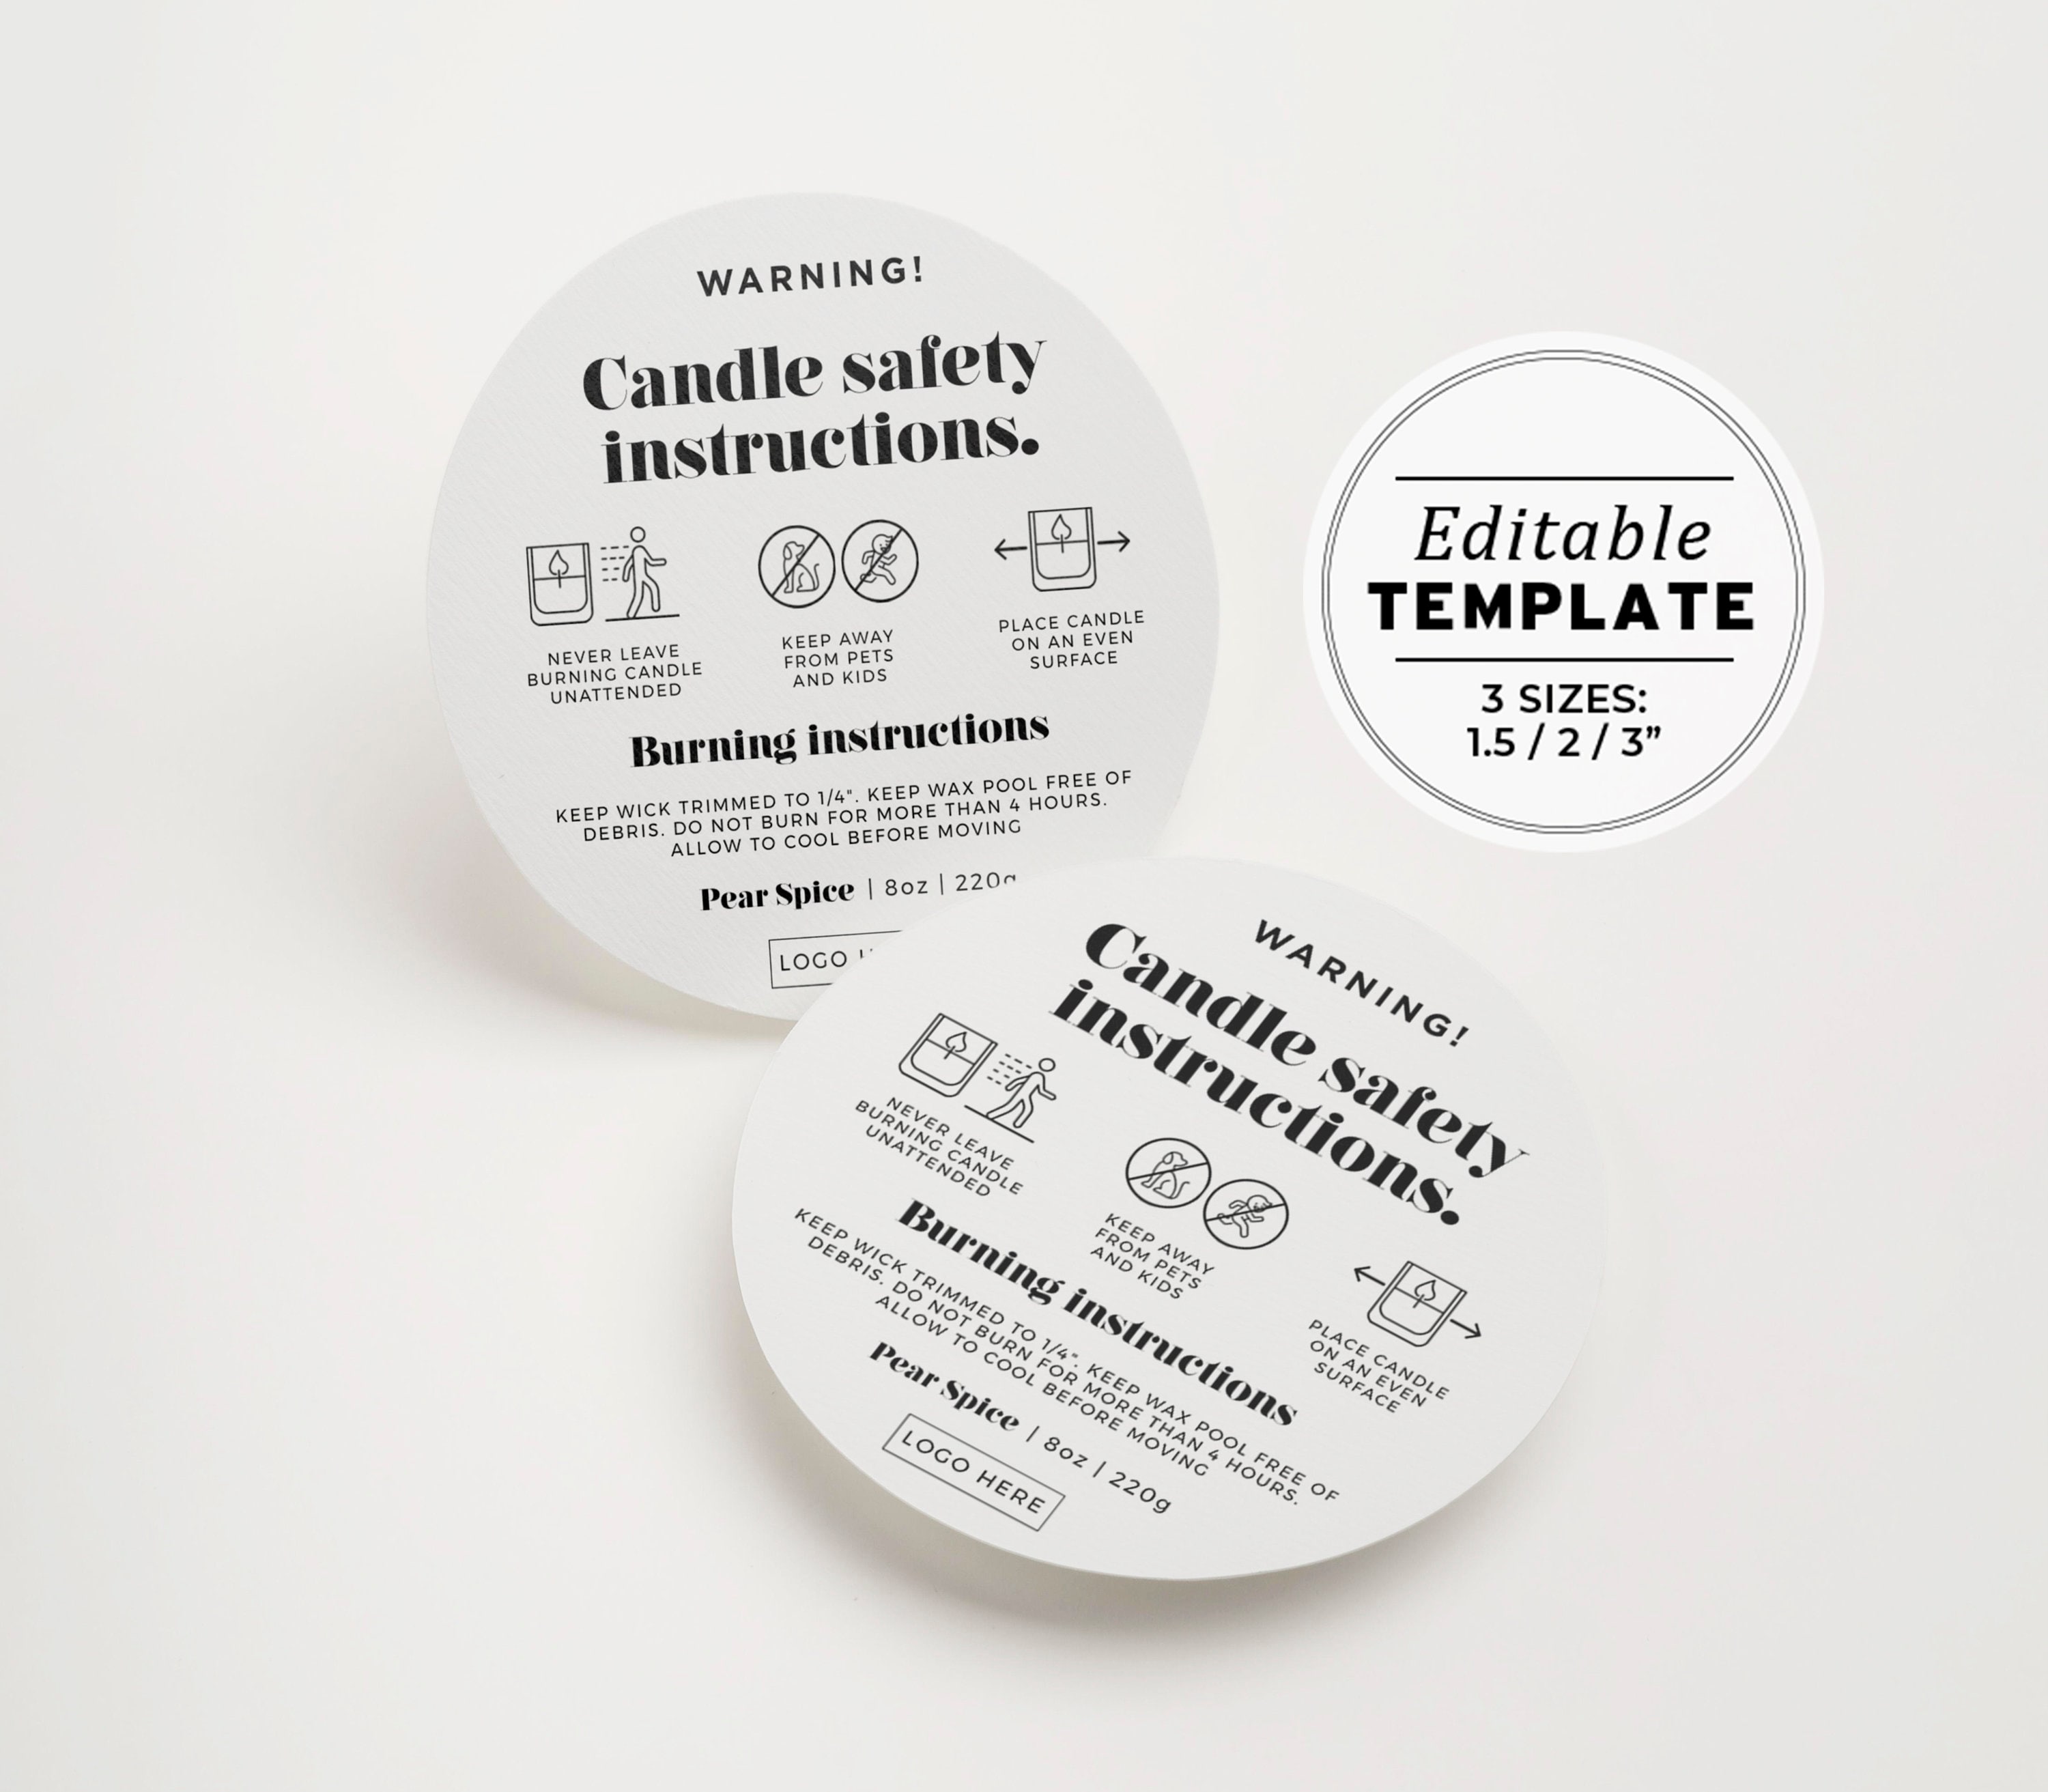 White Candle Warning and Wax Melt Safety Label Template 01 – 413